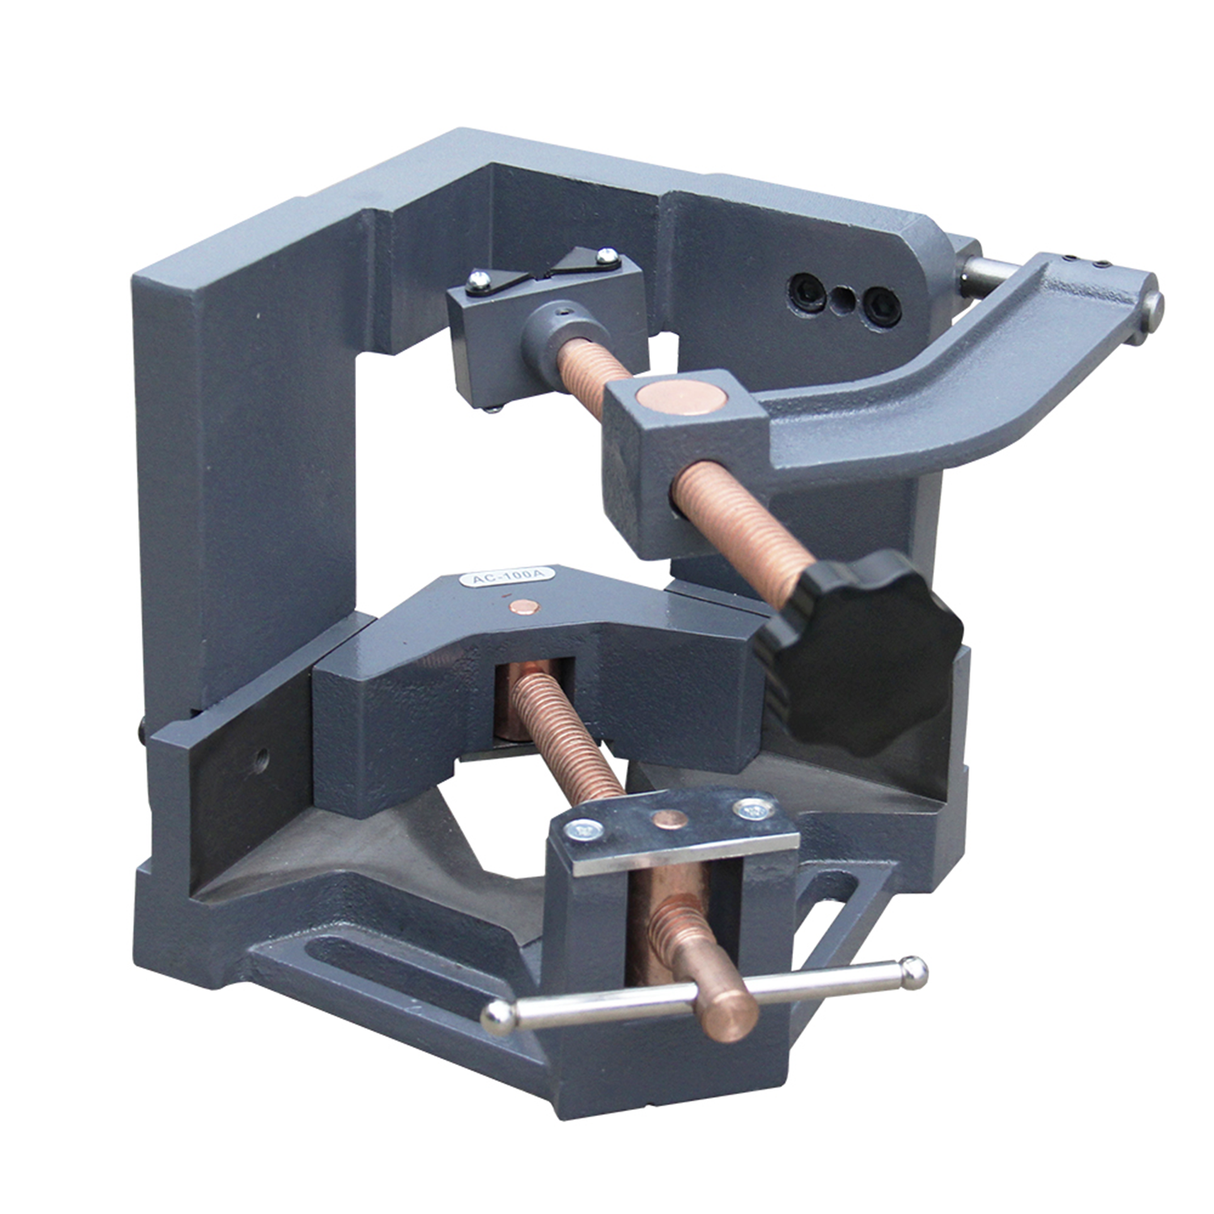 Secure Your Workpiece with Ease: This cast iron body clamp provides a strong and reliable grip for your welding projects.